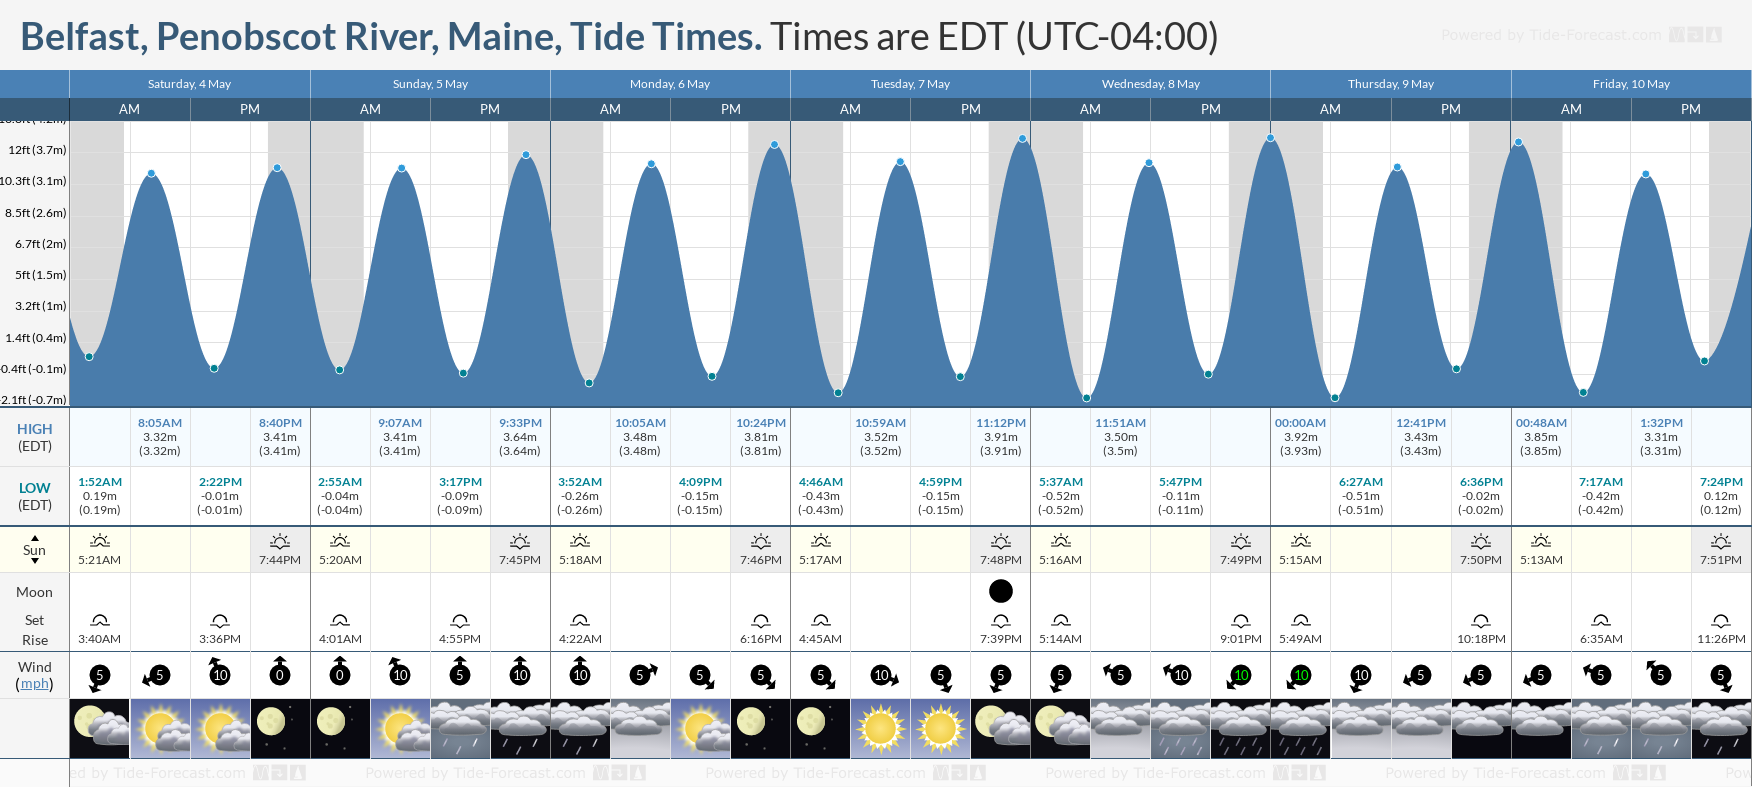 Belfast, Penobscot River, Maine Tide Chart including high and low tide tide times for the next 7 days